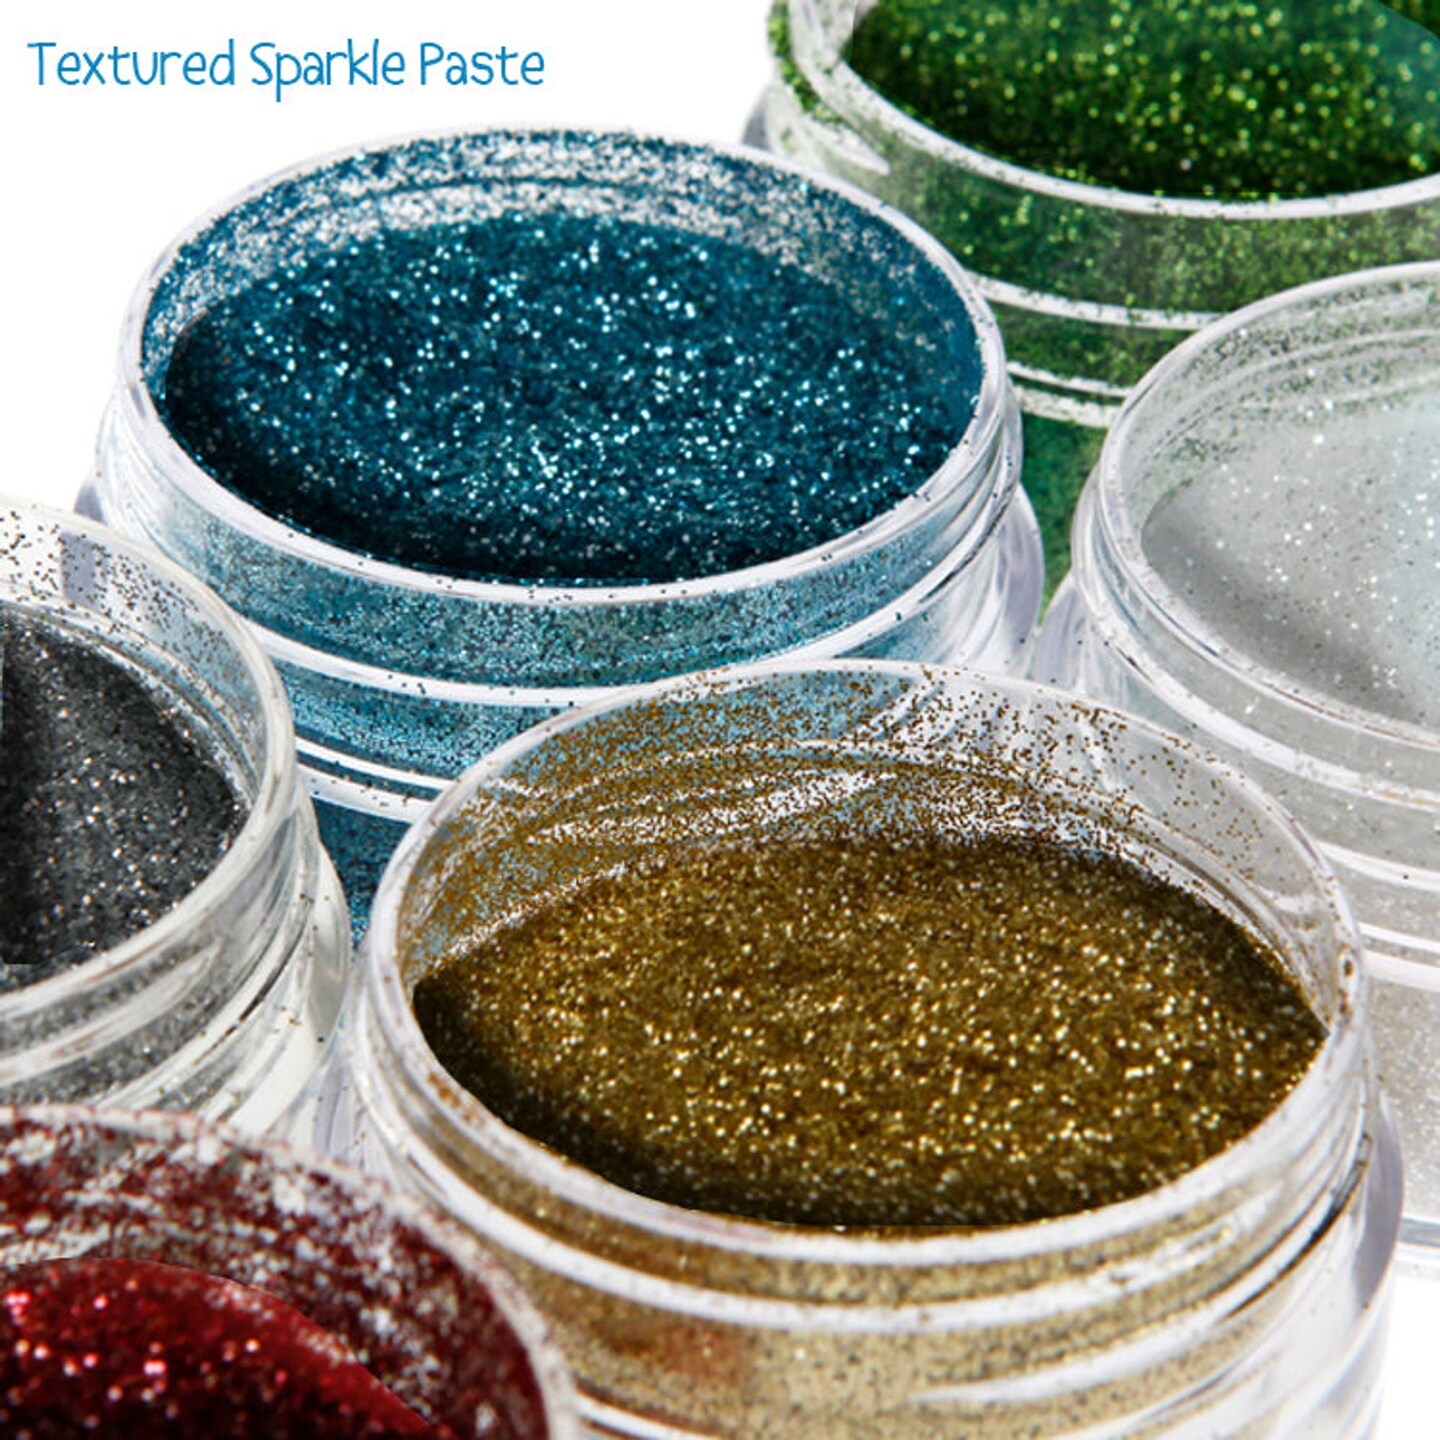 Cosmic Shimmer  Textured Sparkle Paste - Emerald Green